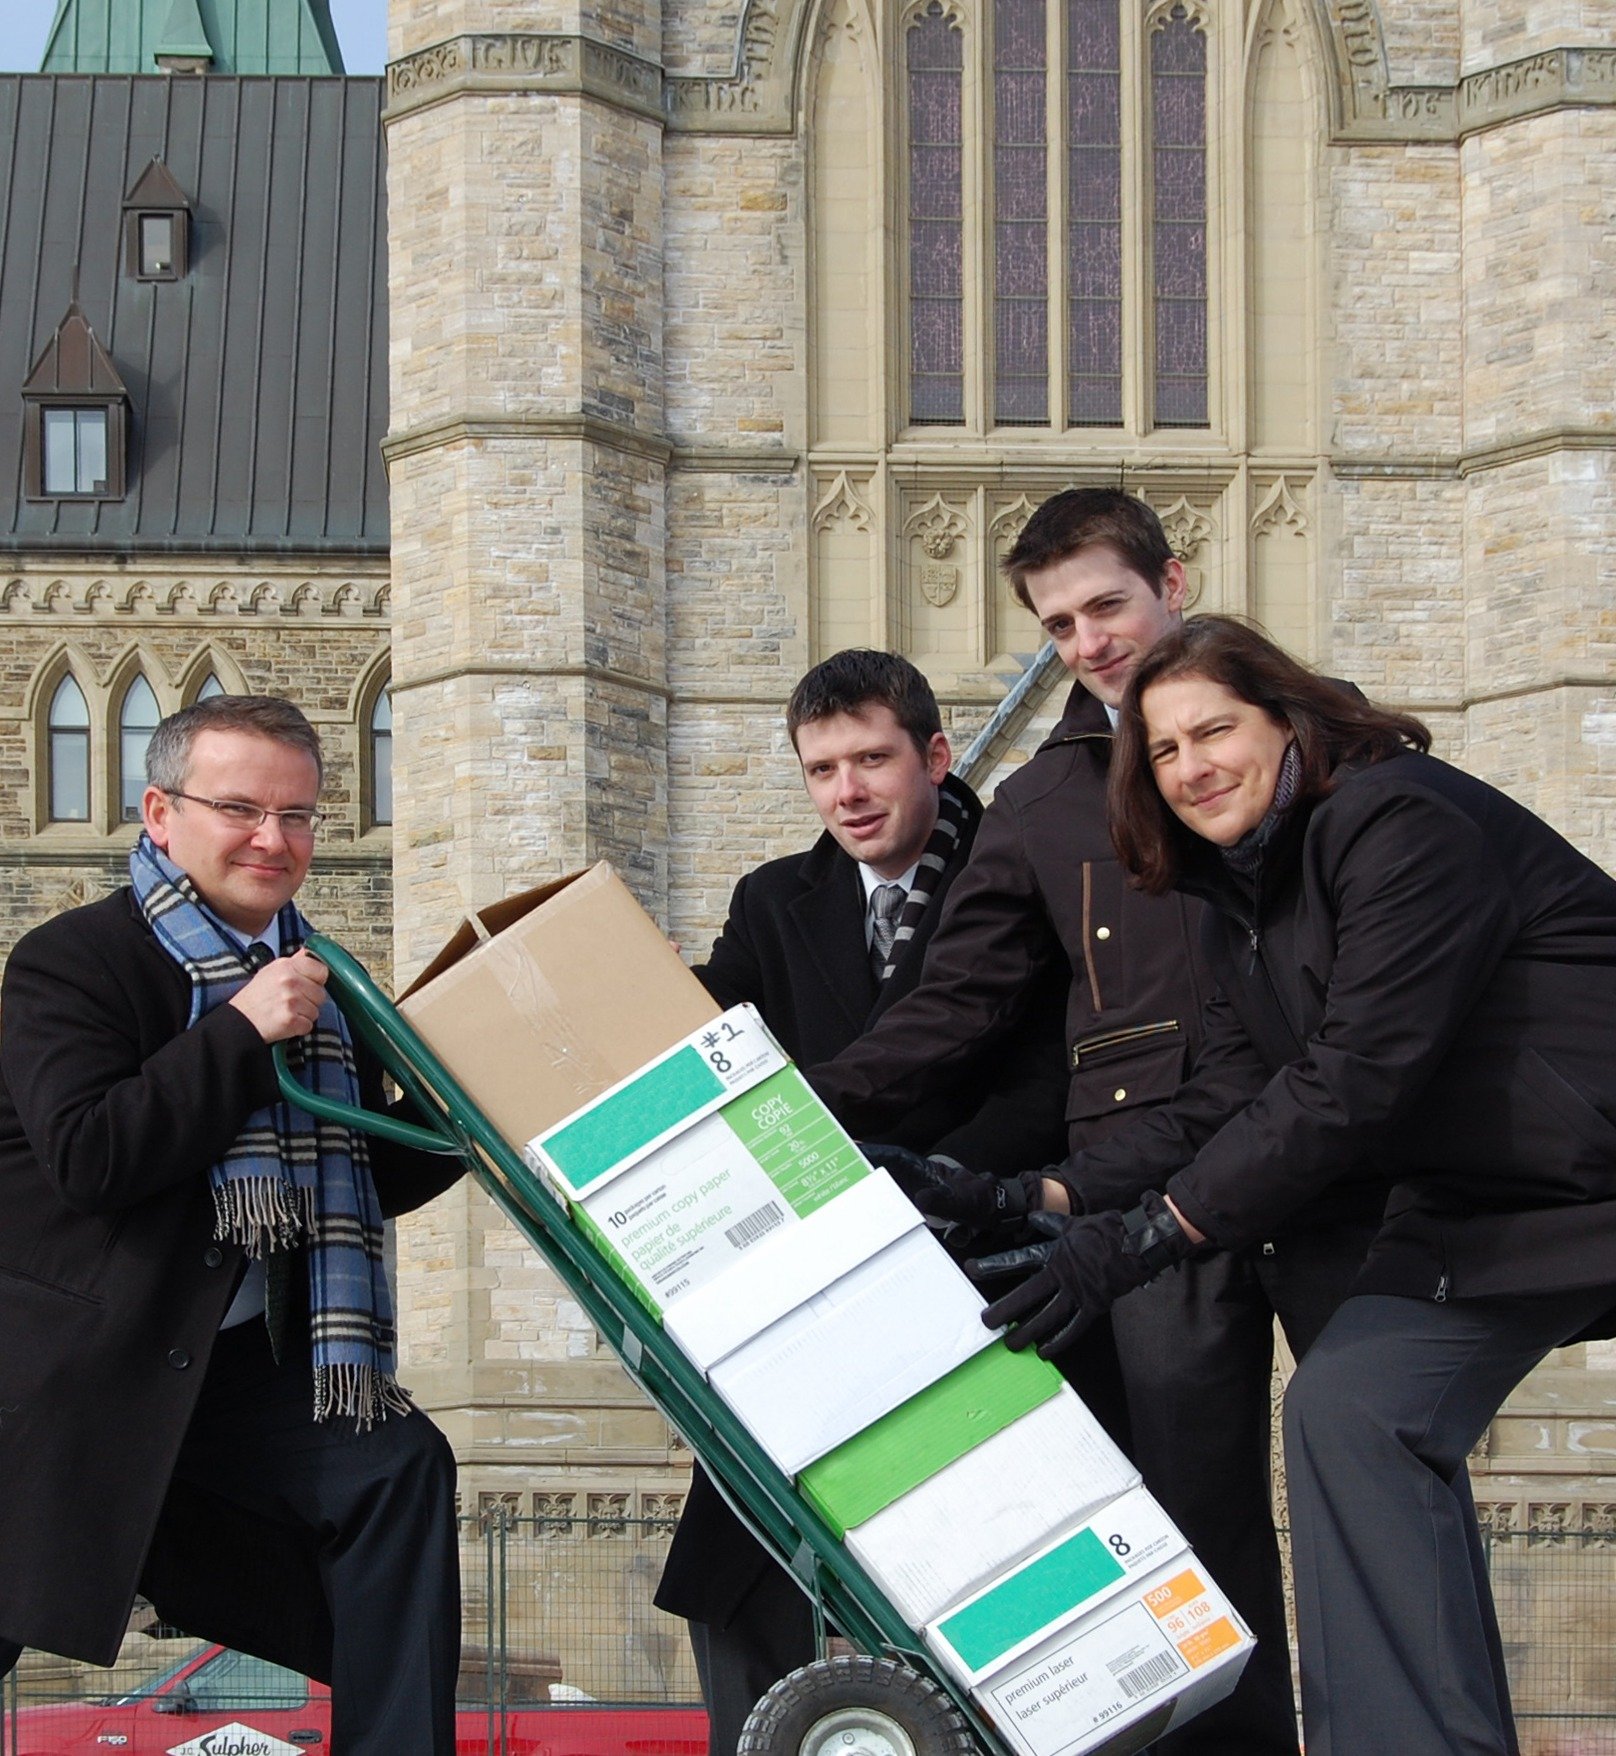 CFIB President Dan Kelly, Executive VP of Advocacy Corinne Pohlmann, and two colleagues hand delivering 50,000 signed petitions to parliament. 